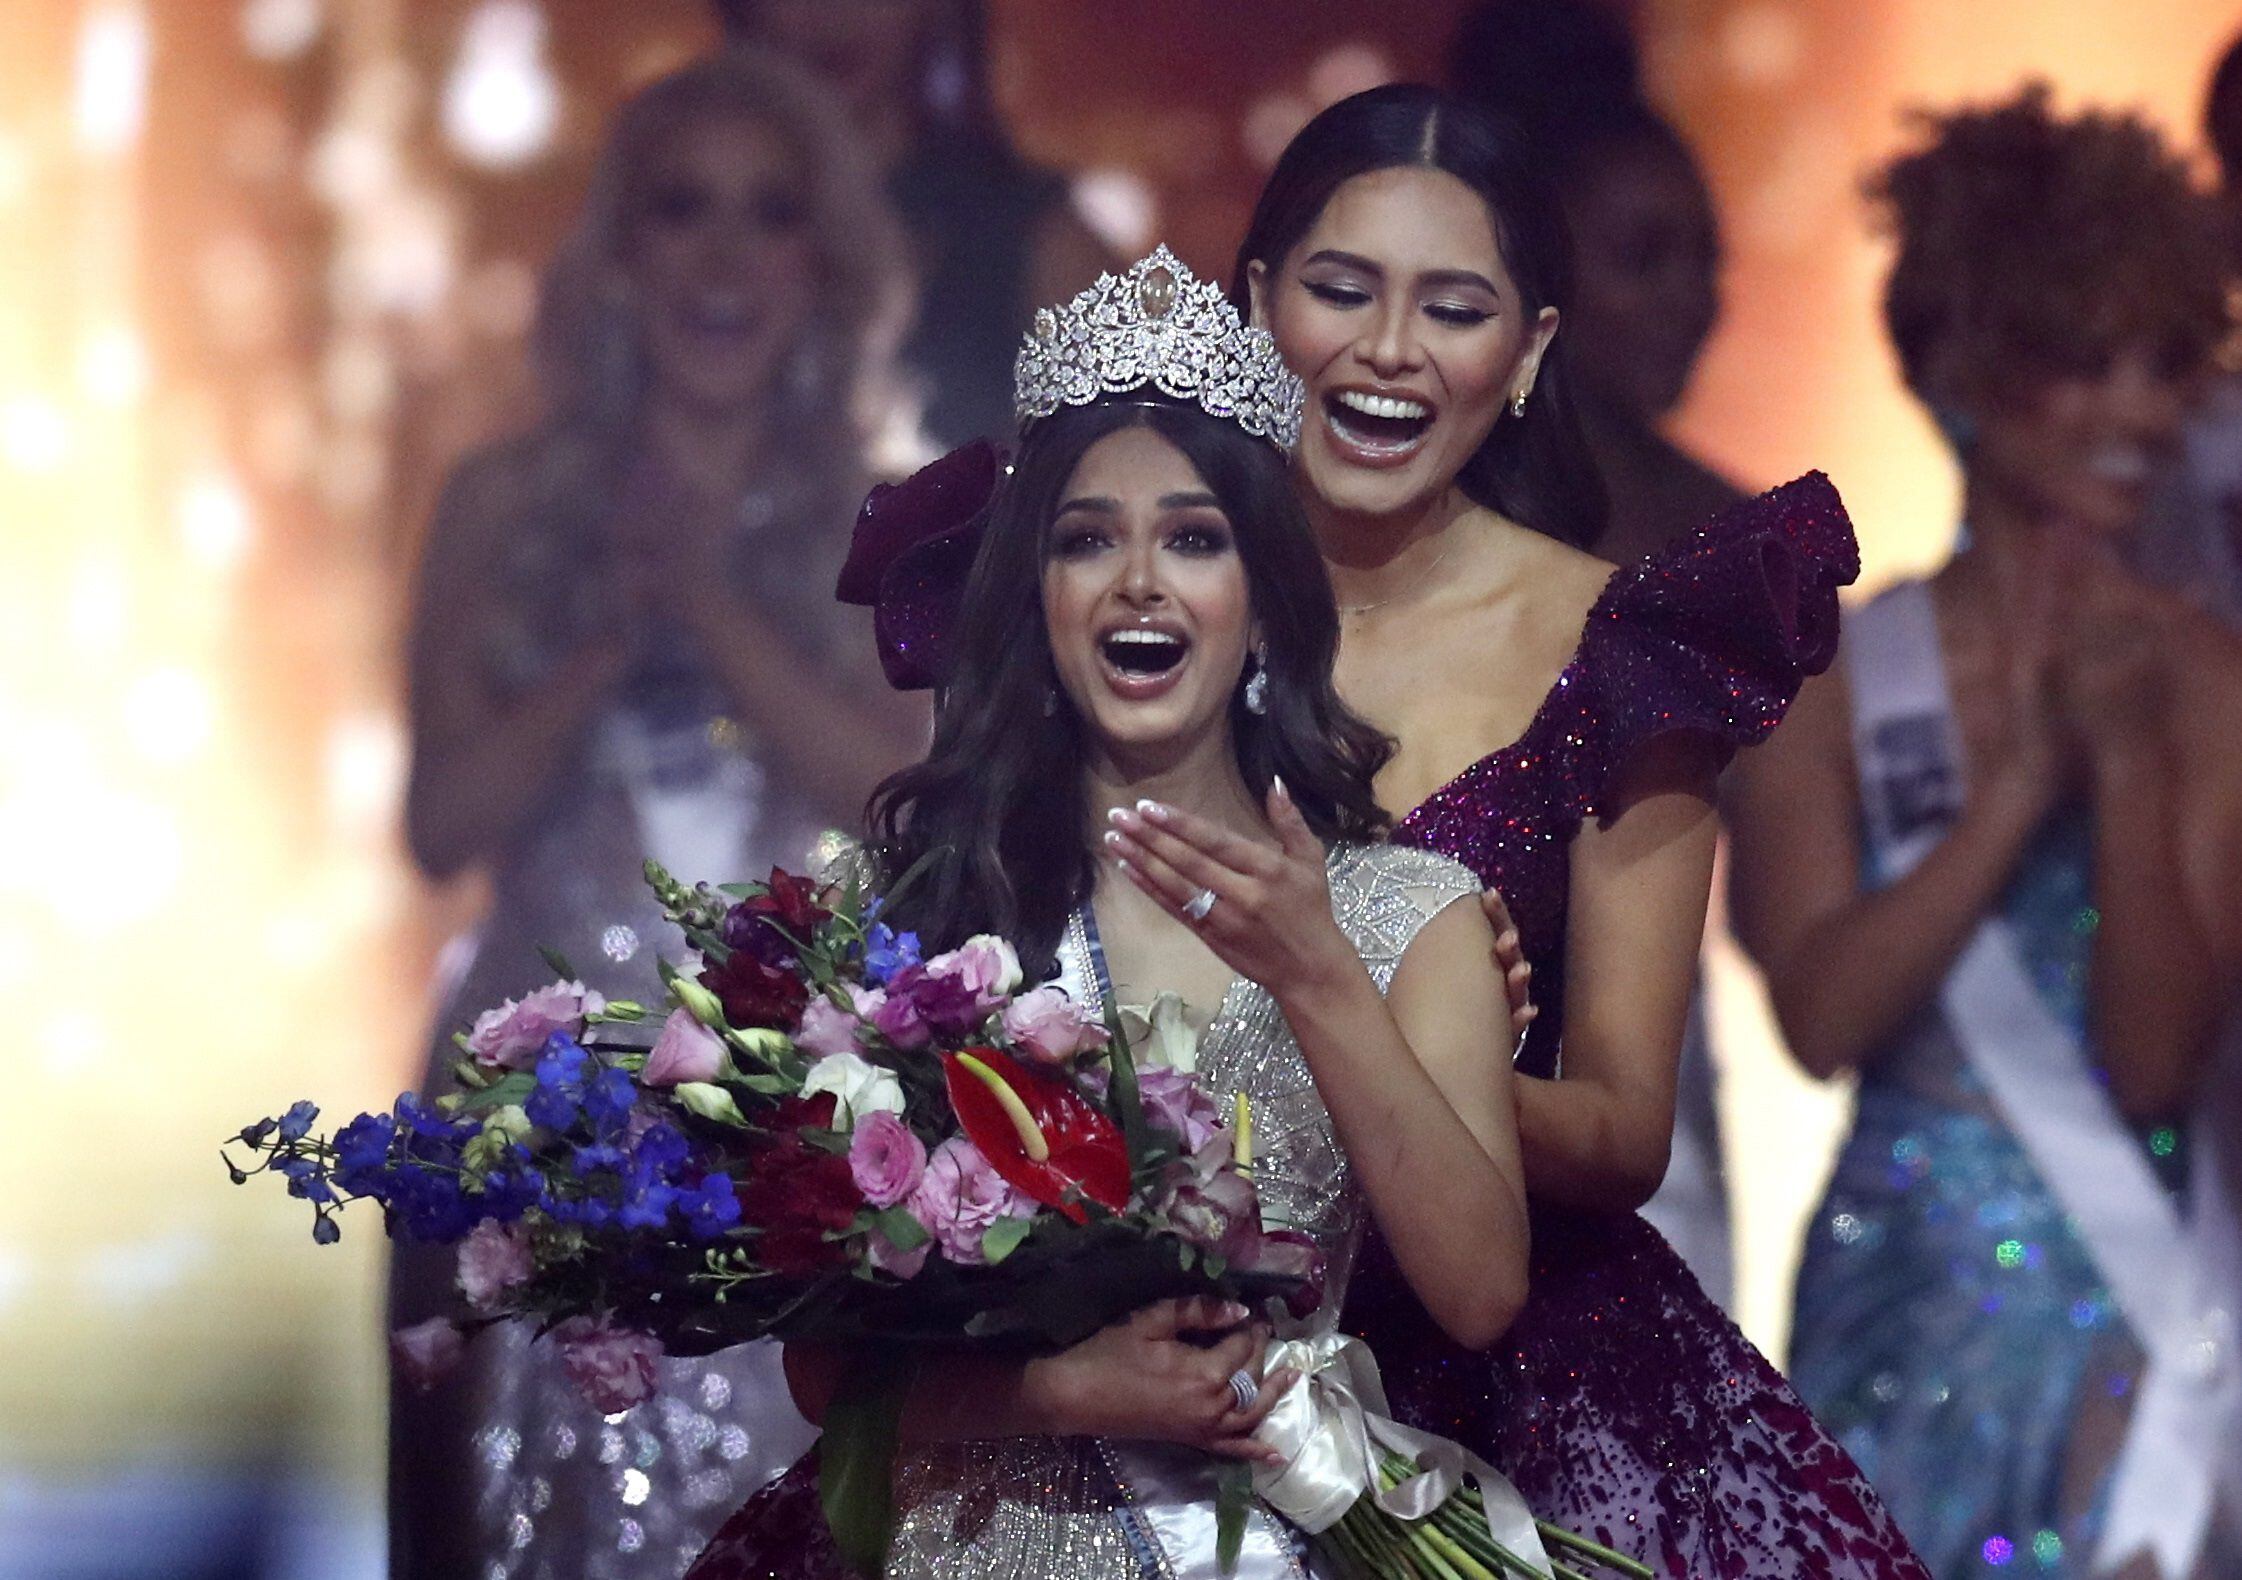 What will Andrea Meza do after handing over the Miss Universe crown to Harnaaz Kaur Sandhu